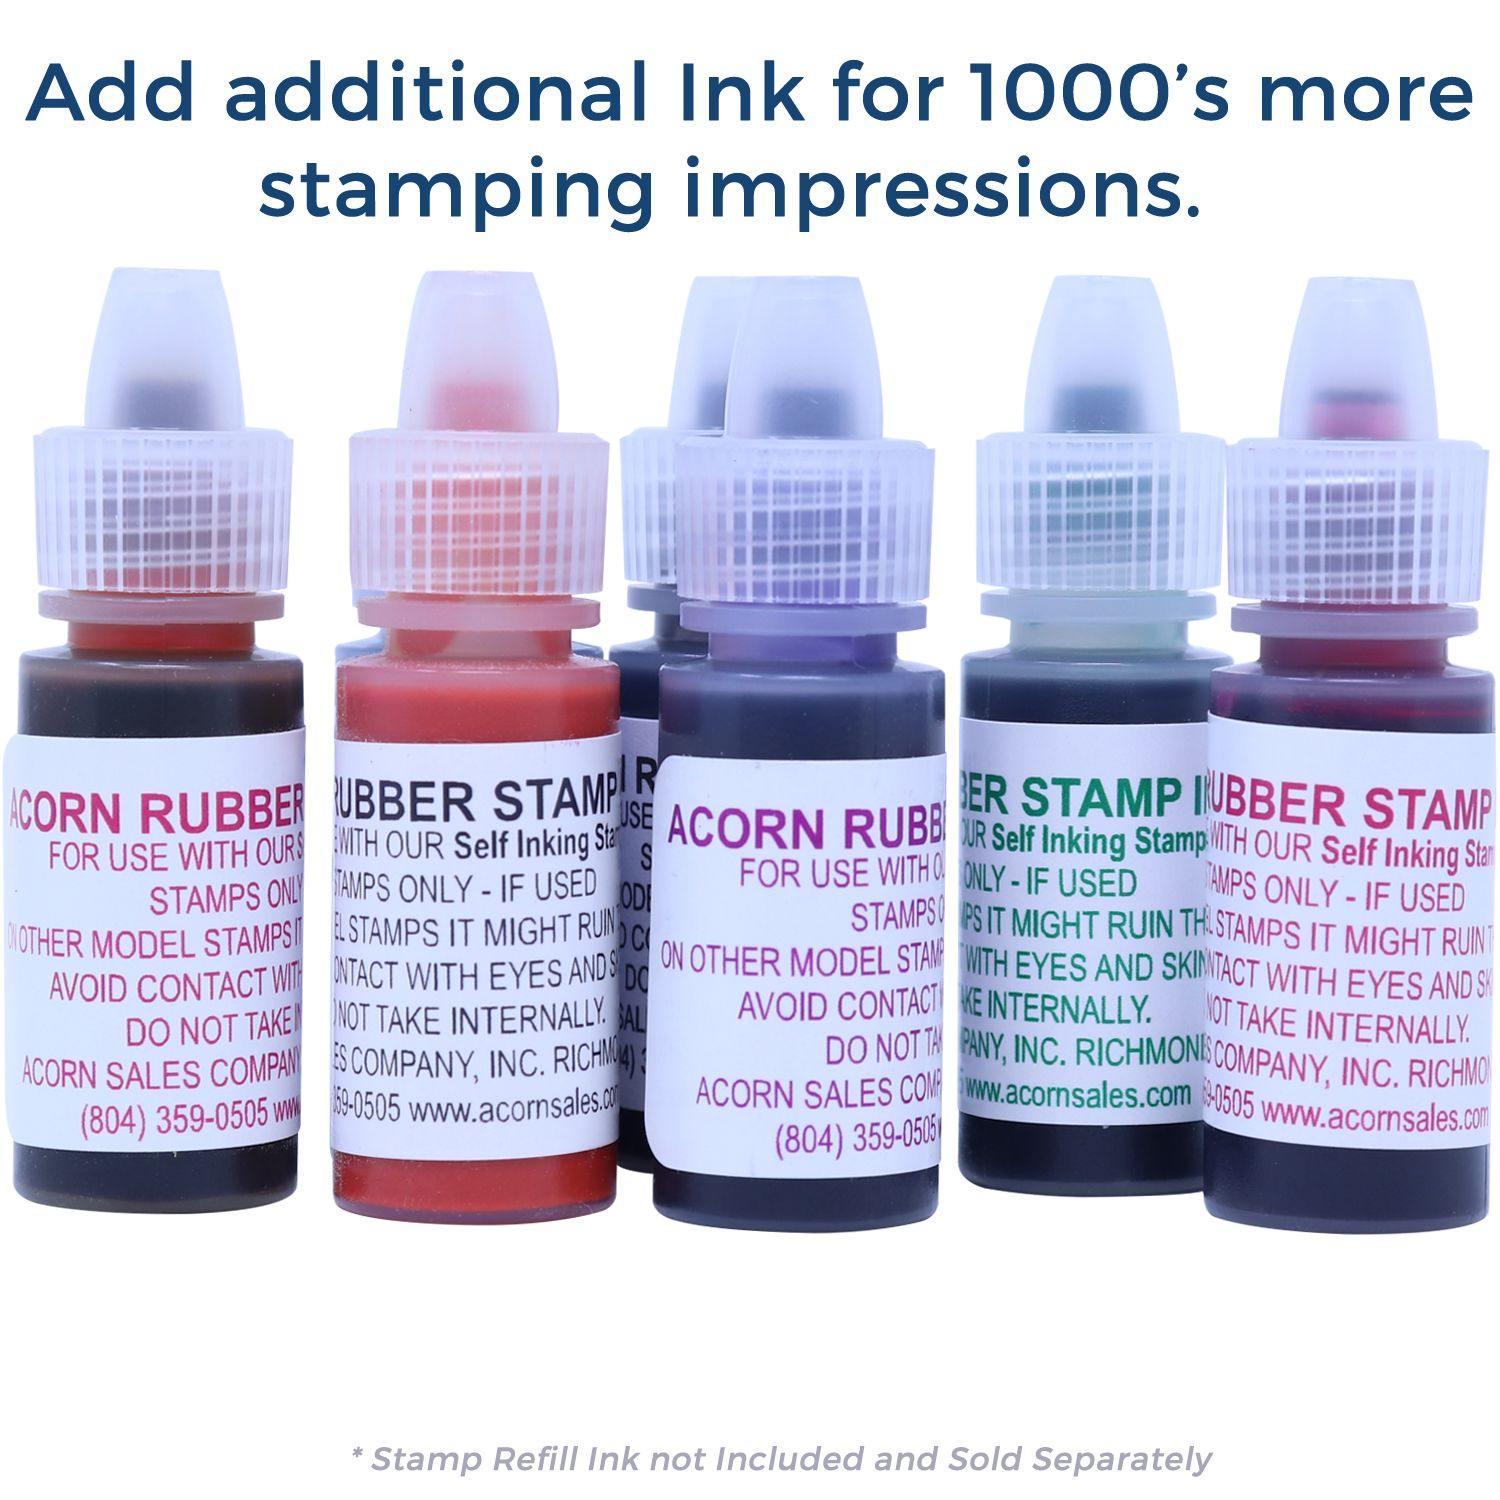 Refill Inks for Large Pre-Inked Aviso Stamp Available